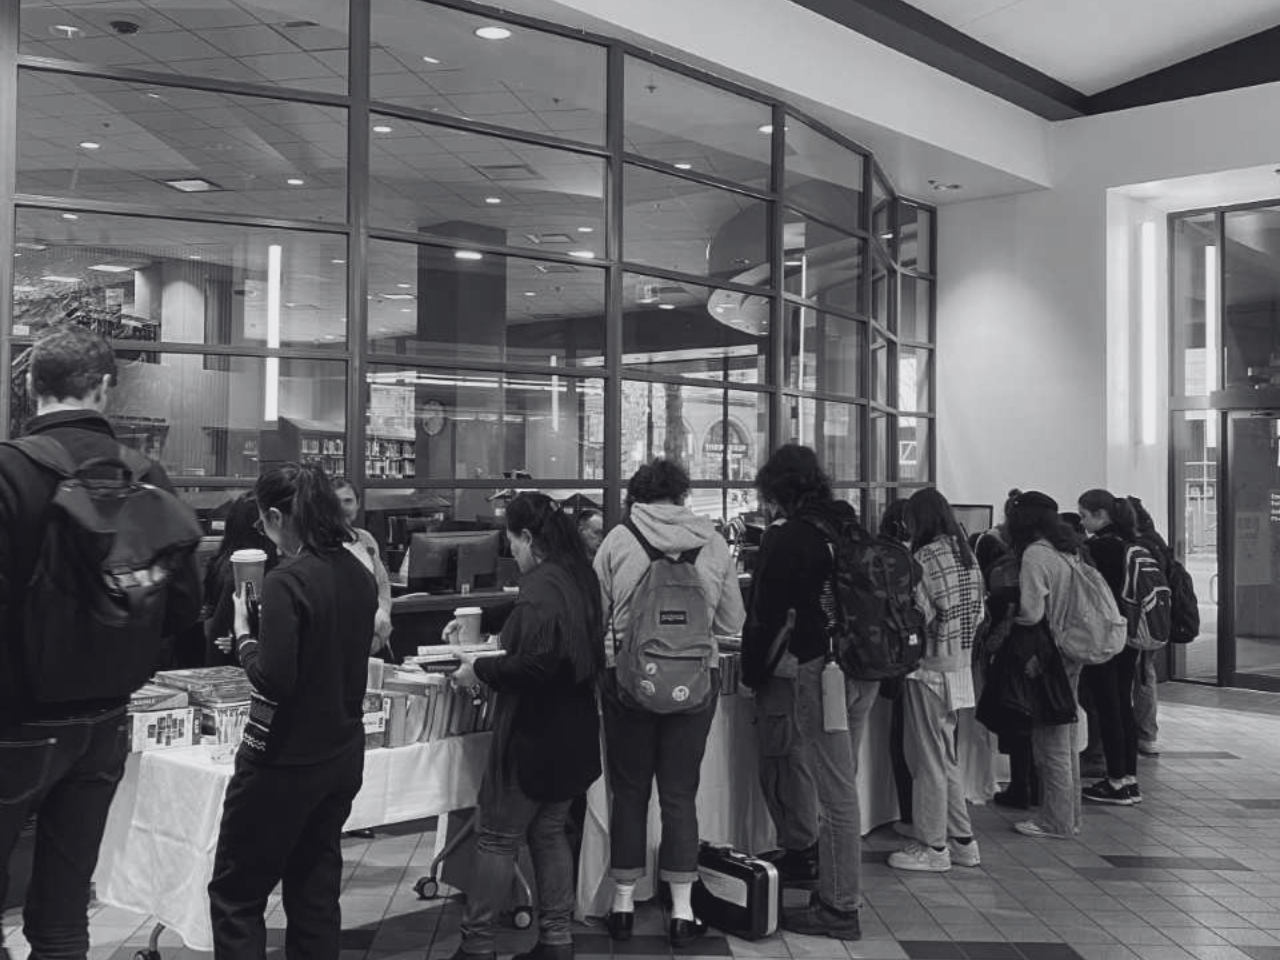 A group of students crowd a table at the Vancouver Book and Bake Sale.